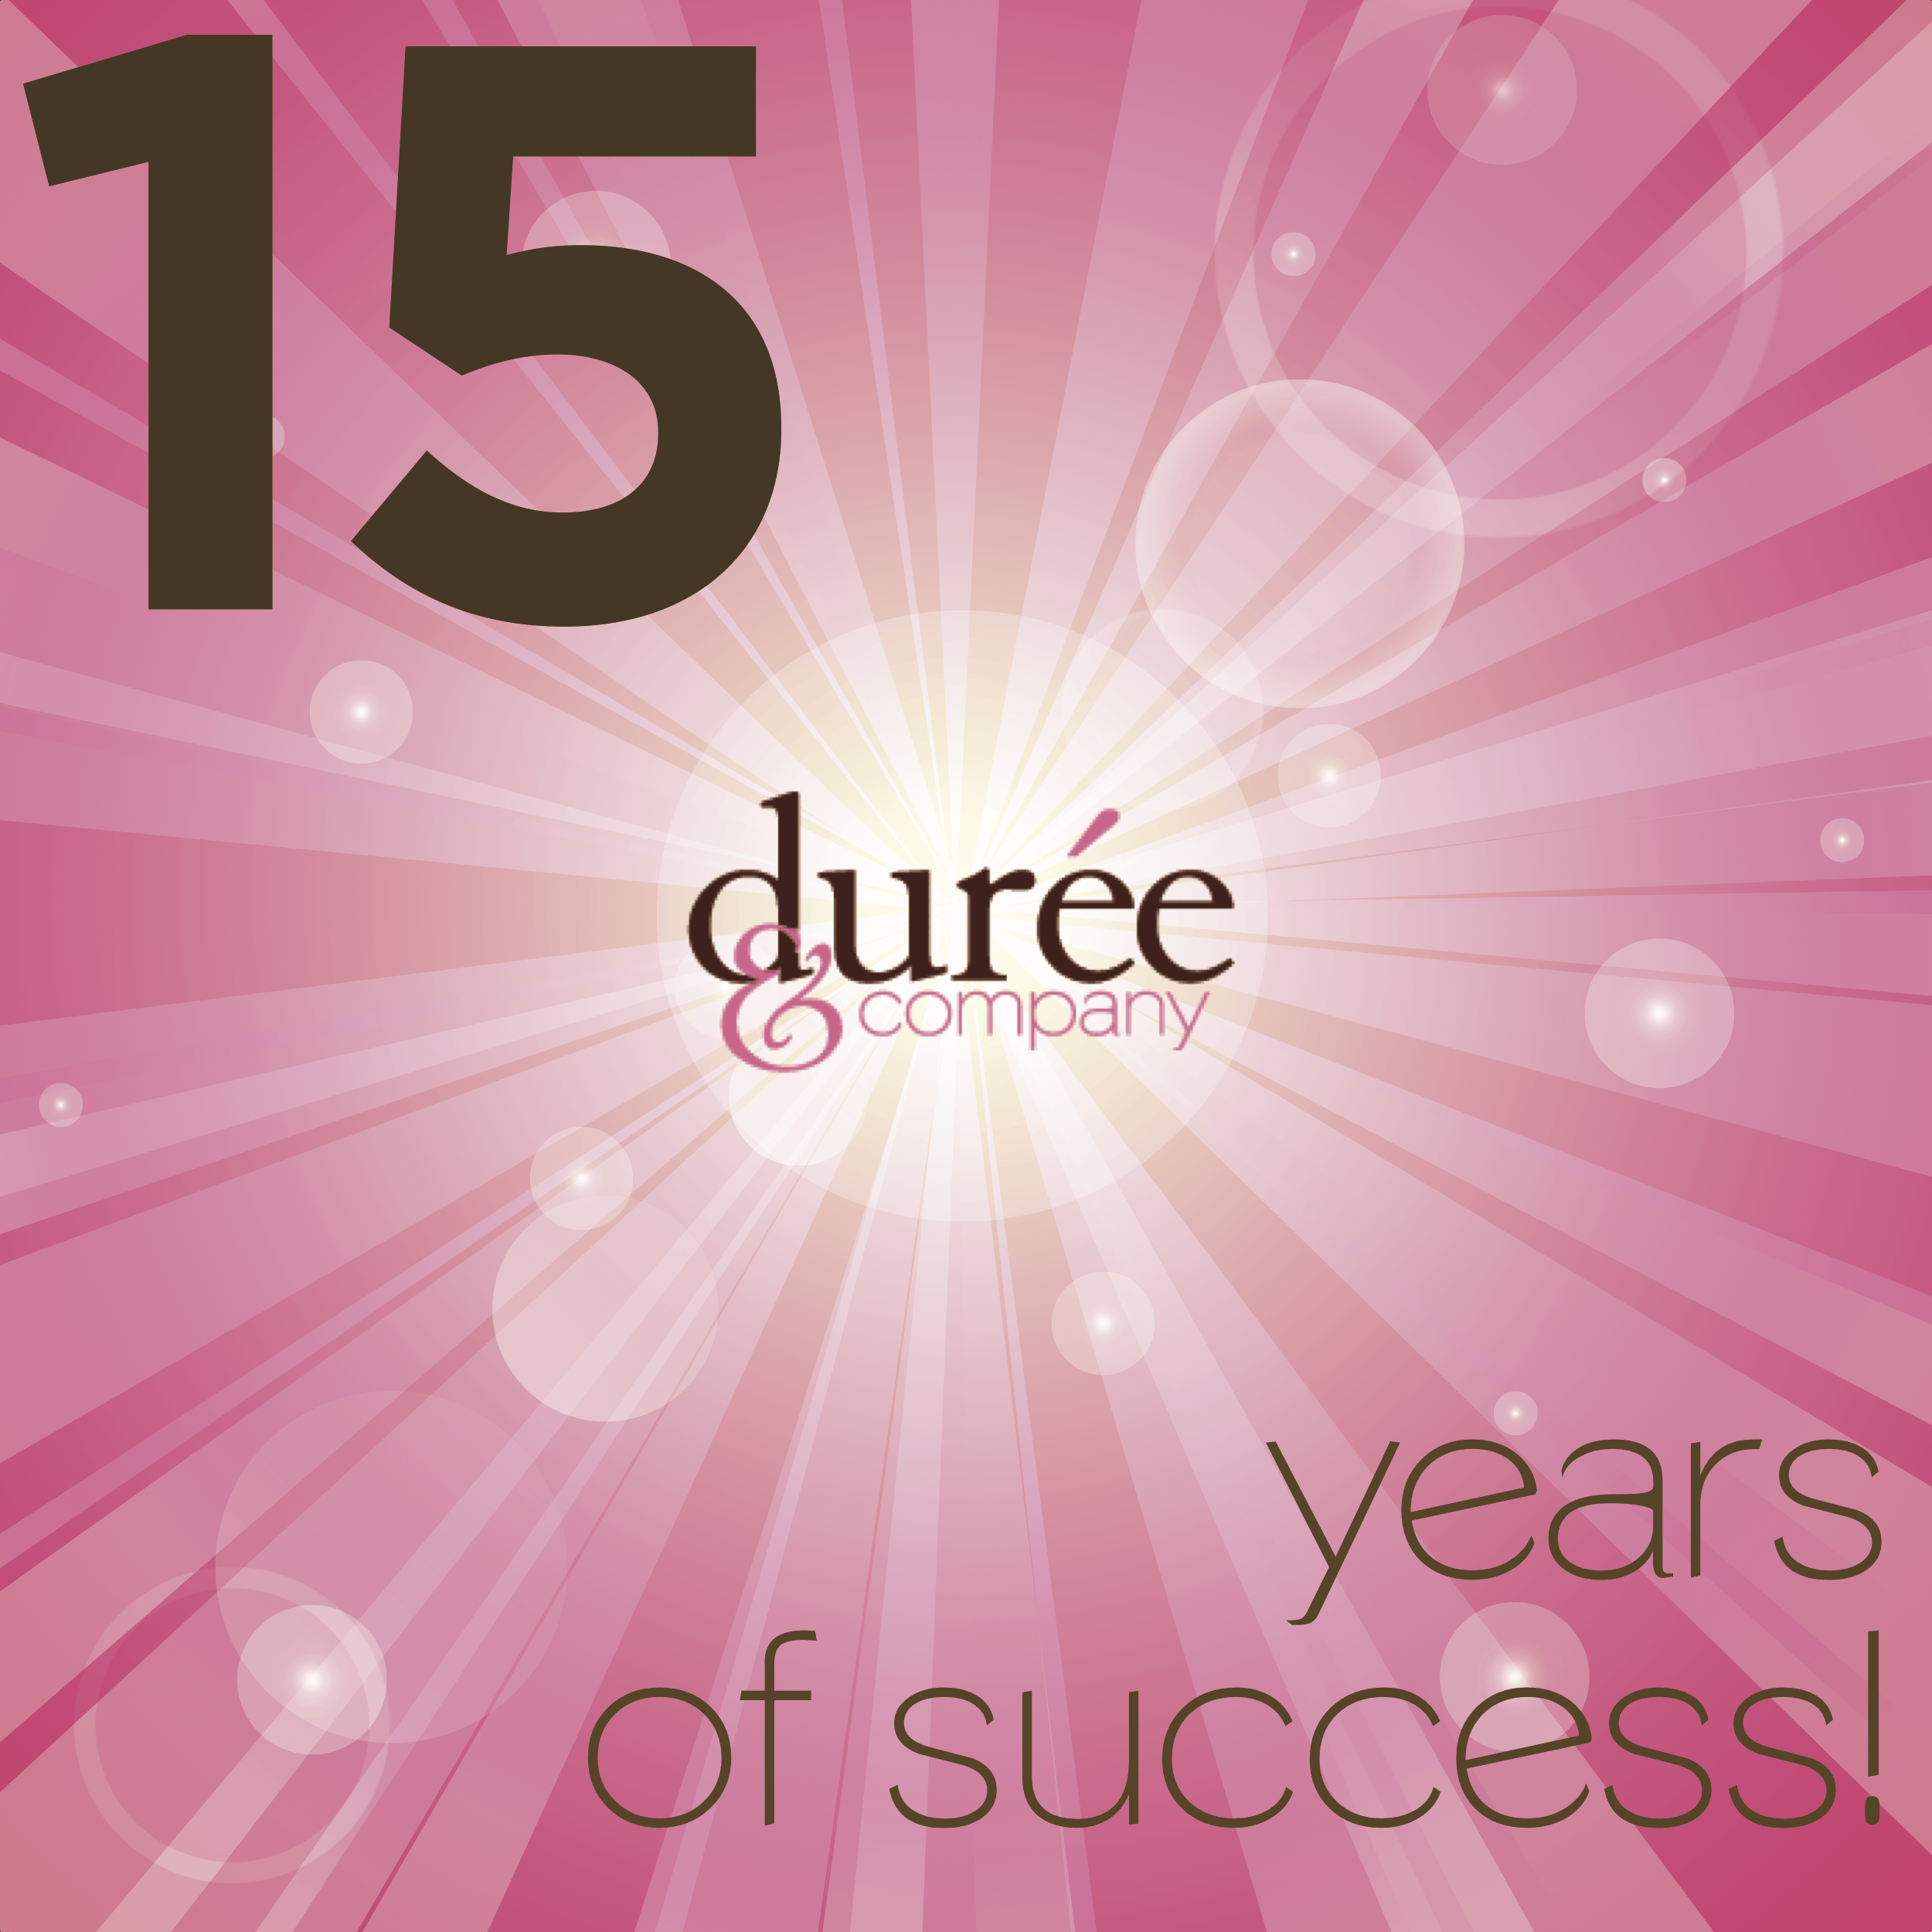 Durée and company 15 years old success